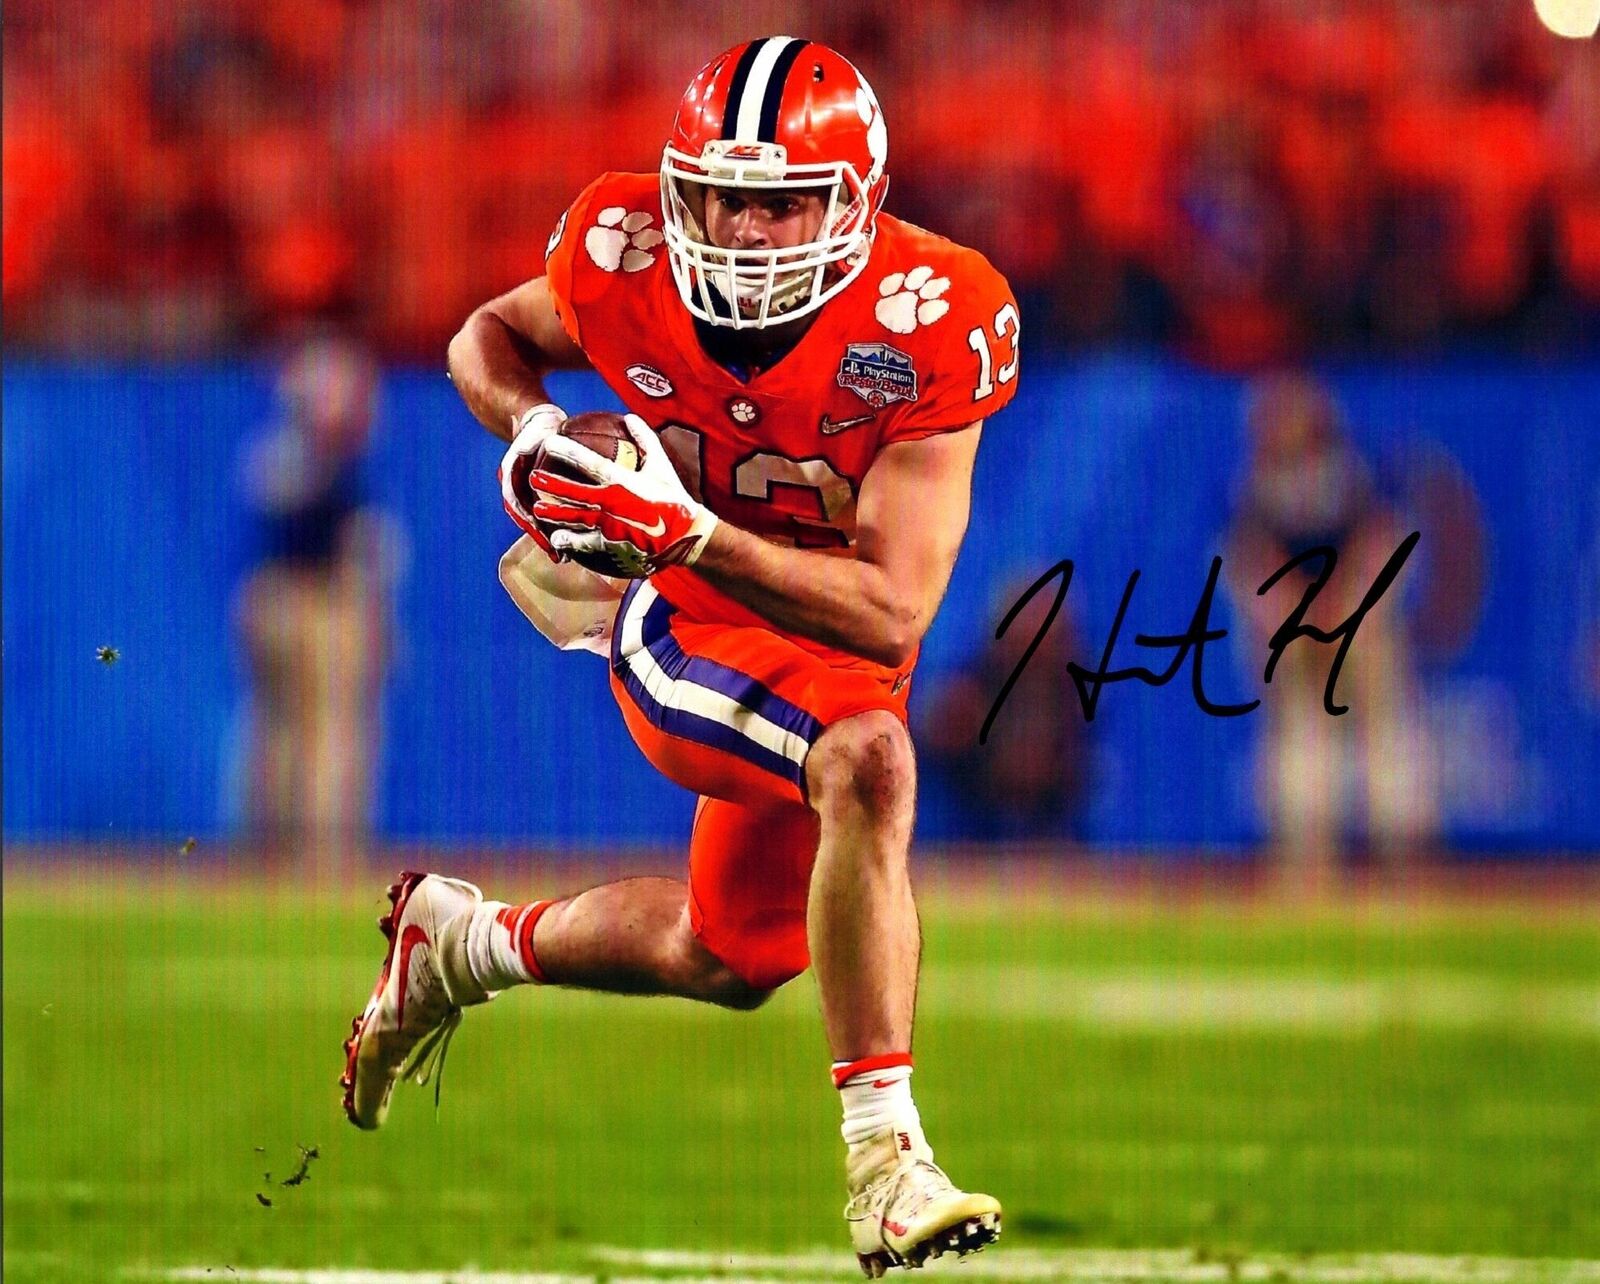 Hunter Renfrow Signed 8x10 Photo Poster painting - Clemson Tigers - NCAA NFL COA